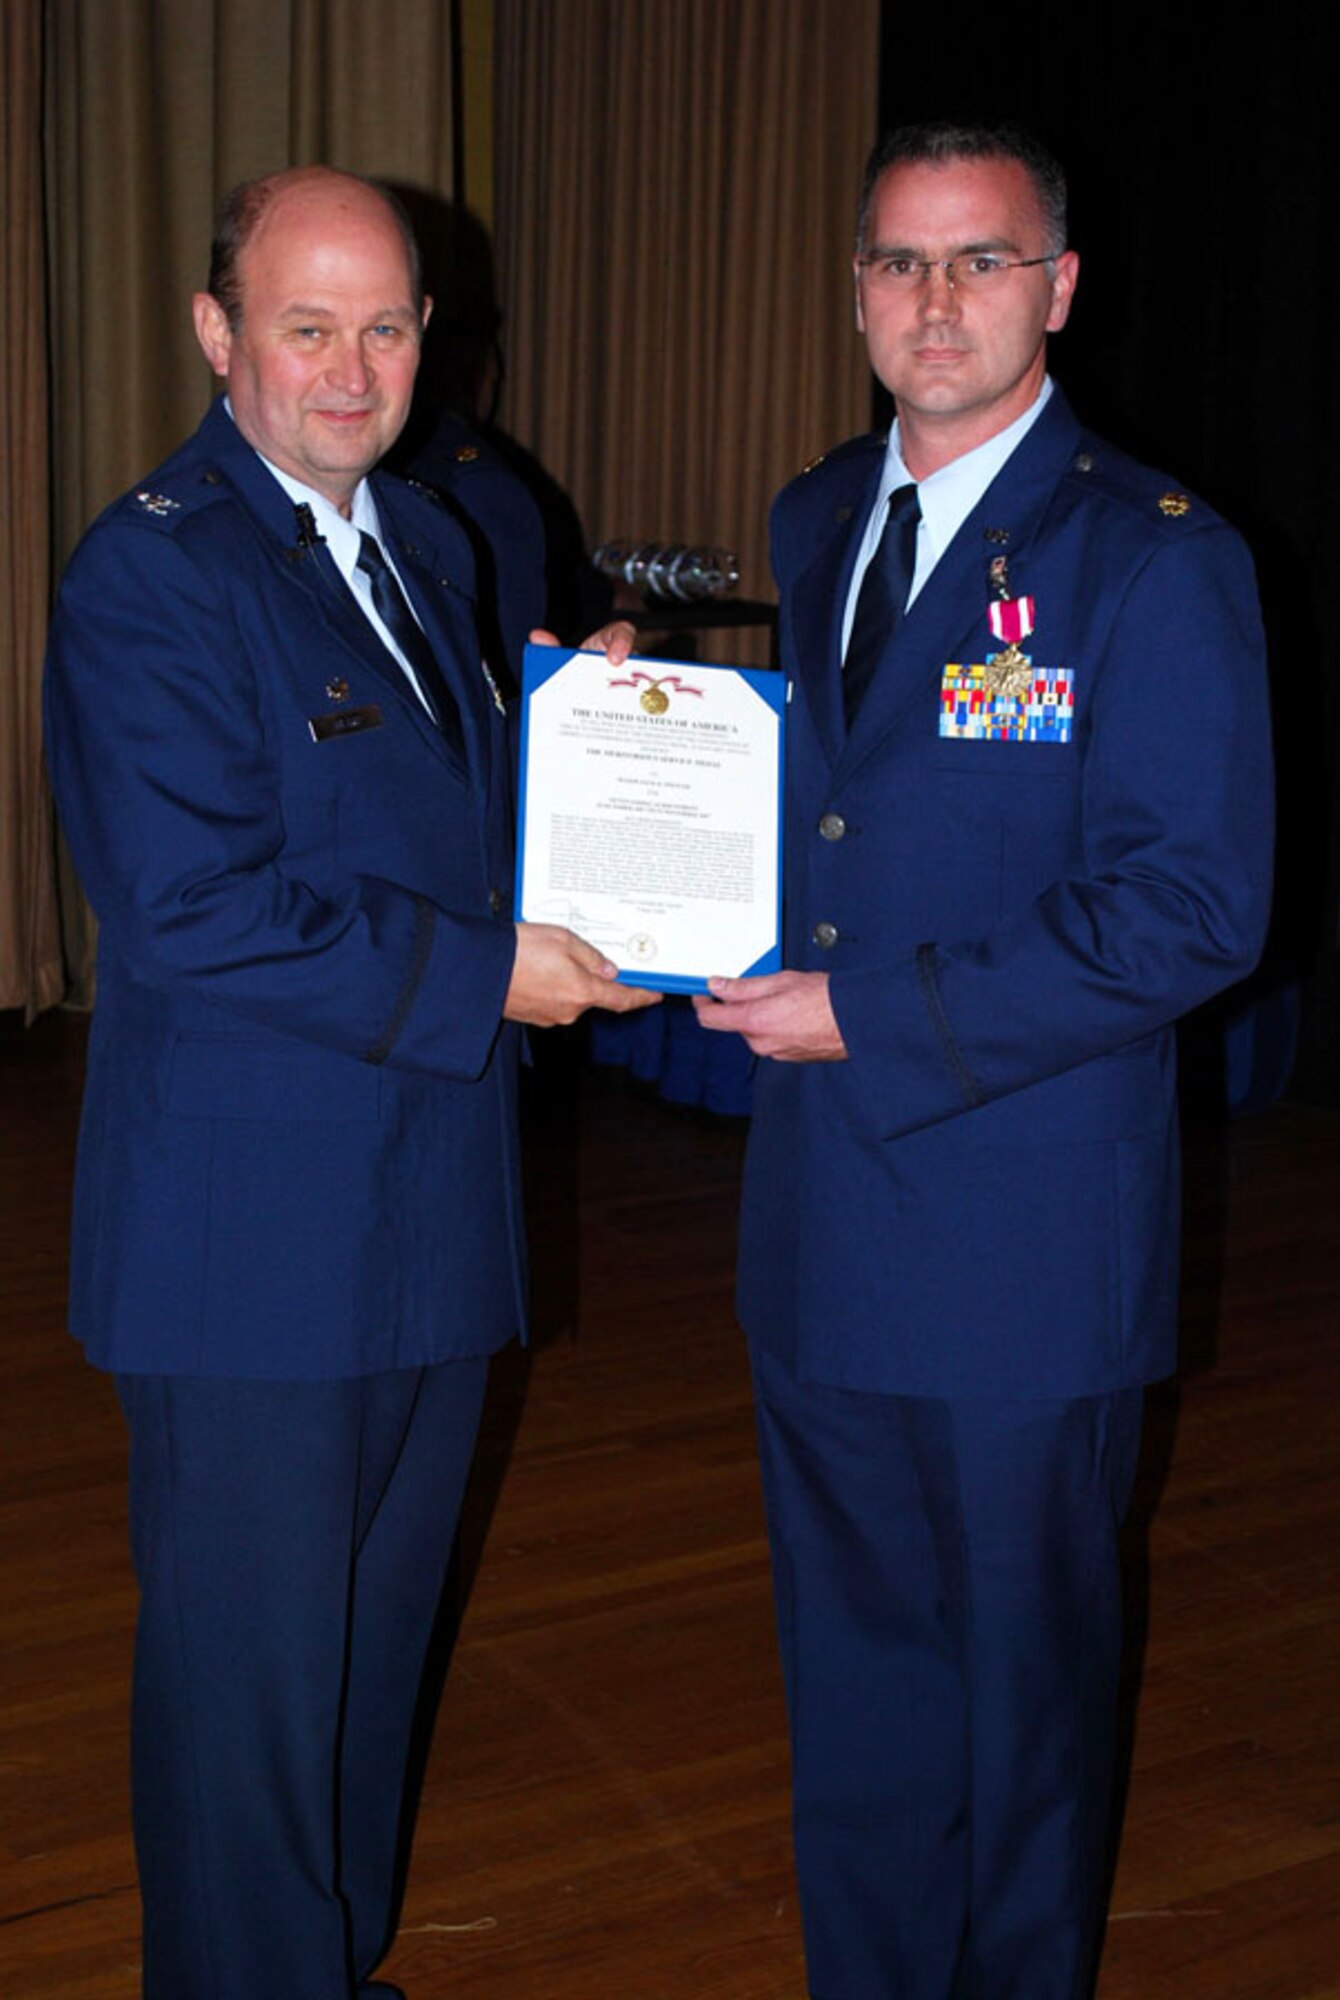 Major Jack D. Spencer, an Air Force Reservist with the 507th Air Refueling Wing Legal Office, recently received the Air Force Meritorious Service Medal. 

According to his citation, the major distinguished himself while serving an extendided active duty tour assigned to the Oklahoma City Air Logistics Center and the 507th ARW. 

Among other accomplishments, he volunteered for numerous extended duty tours supporting critically short manned legal offices throughout the Air Force, as well as serving a short notice Operation IRAQI FREEDOM deployment to Camp Victory, Iraq. As a direct result of his outstanding officership, the tremendous backlog of detainee cases awaiting review was significantly reduced. 

Major Spencer again volunteered for extended tours of duty assisting Dover Air Force Base, Robins Air Force Base, and Tinker Air Force Base legal offices when they were critically under-manned, thus enabling them to continue the mission as active duty lawyers deployed forward. 
